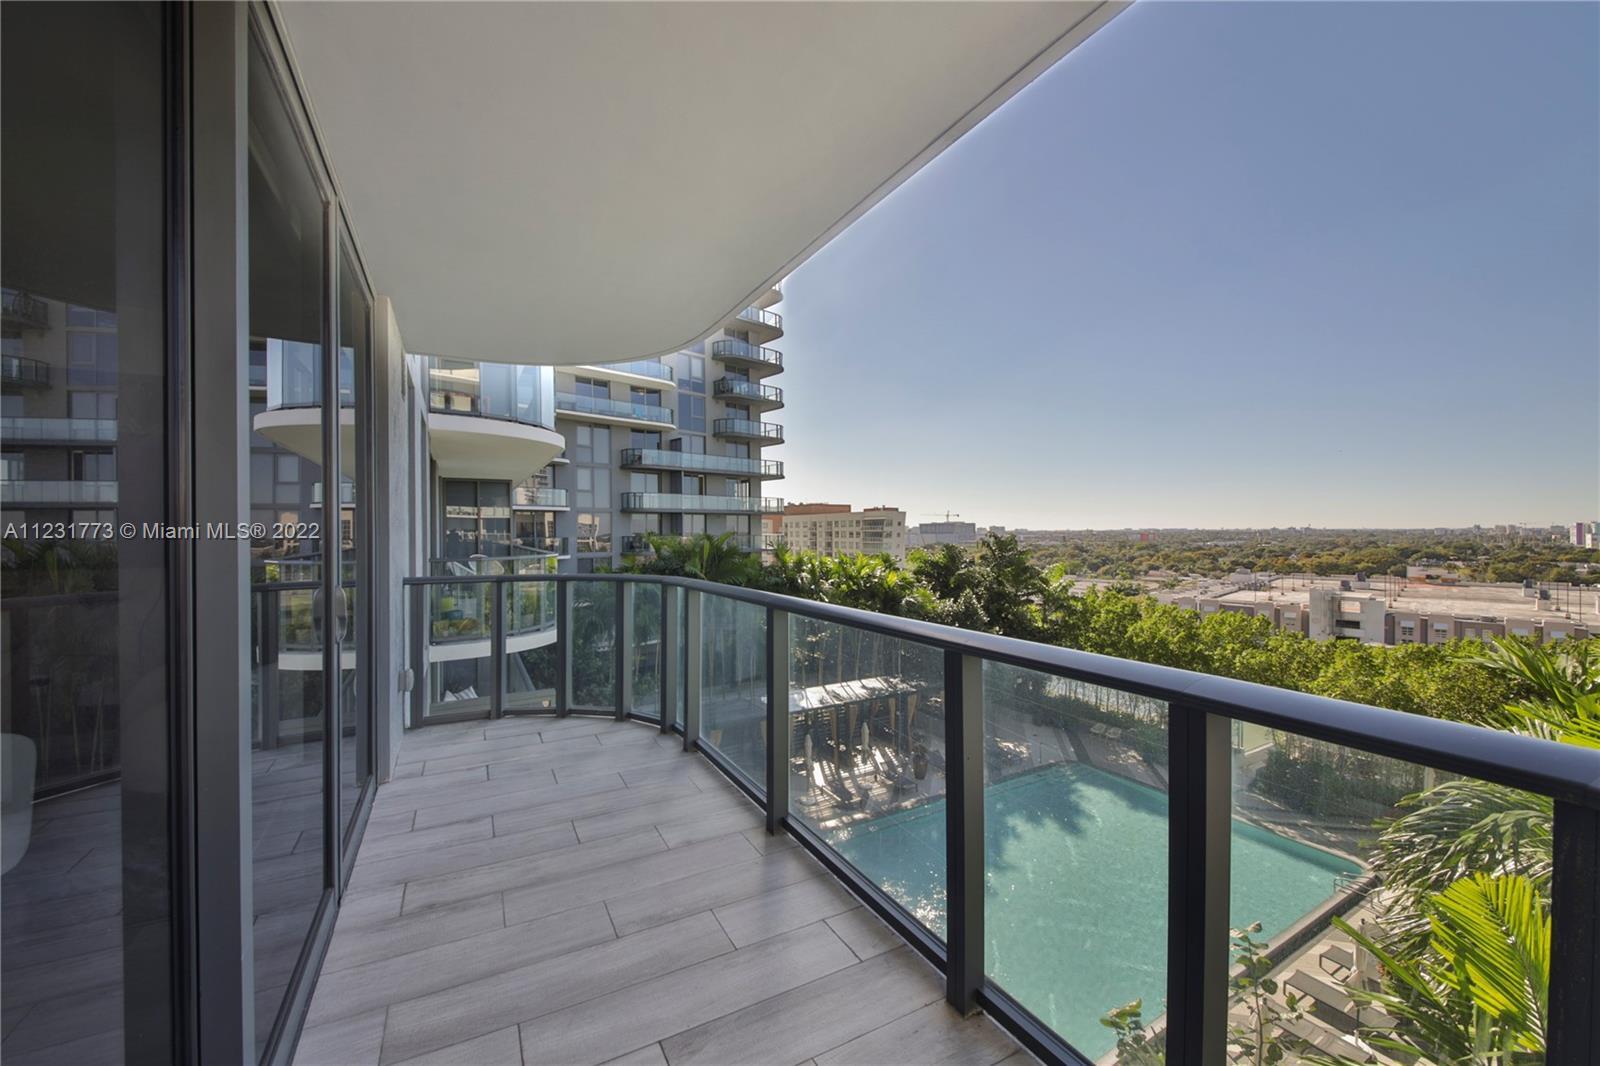 2 BED 2 BATH UNIT AT HYDE MIDTOWN , CERAMIC FLOOR, TERRACE WITH GLASS AND ALUMINUM RAILINGS,SPACIOUS